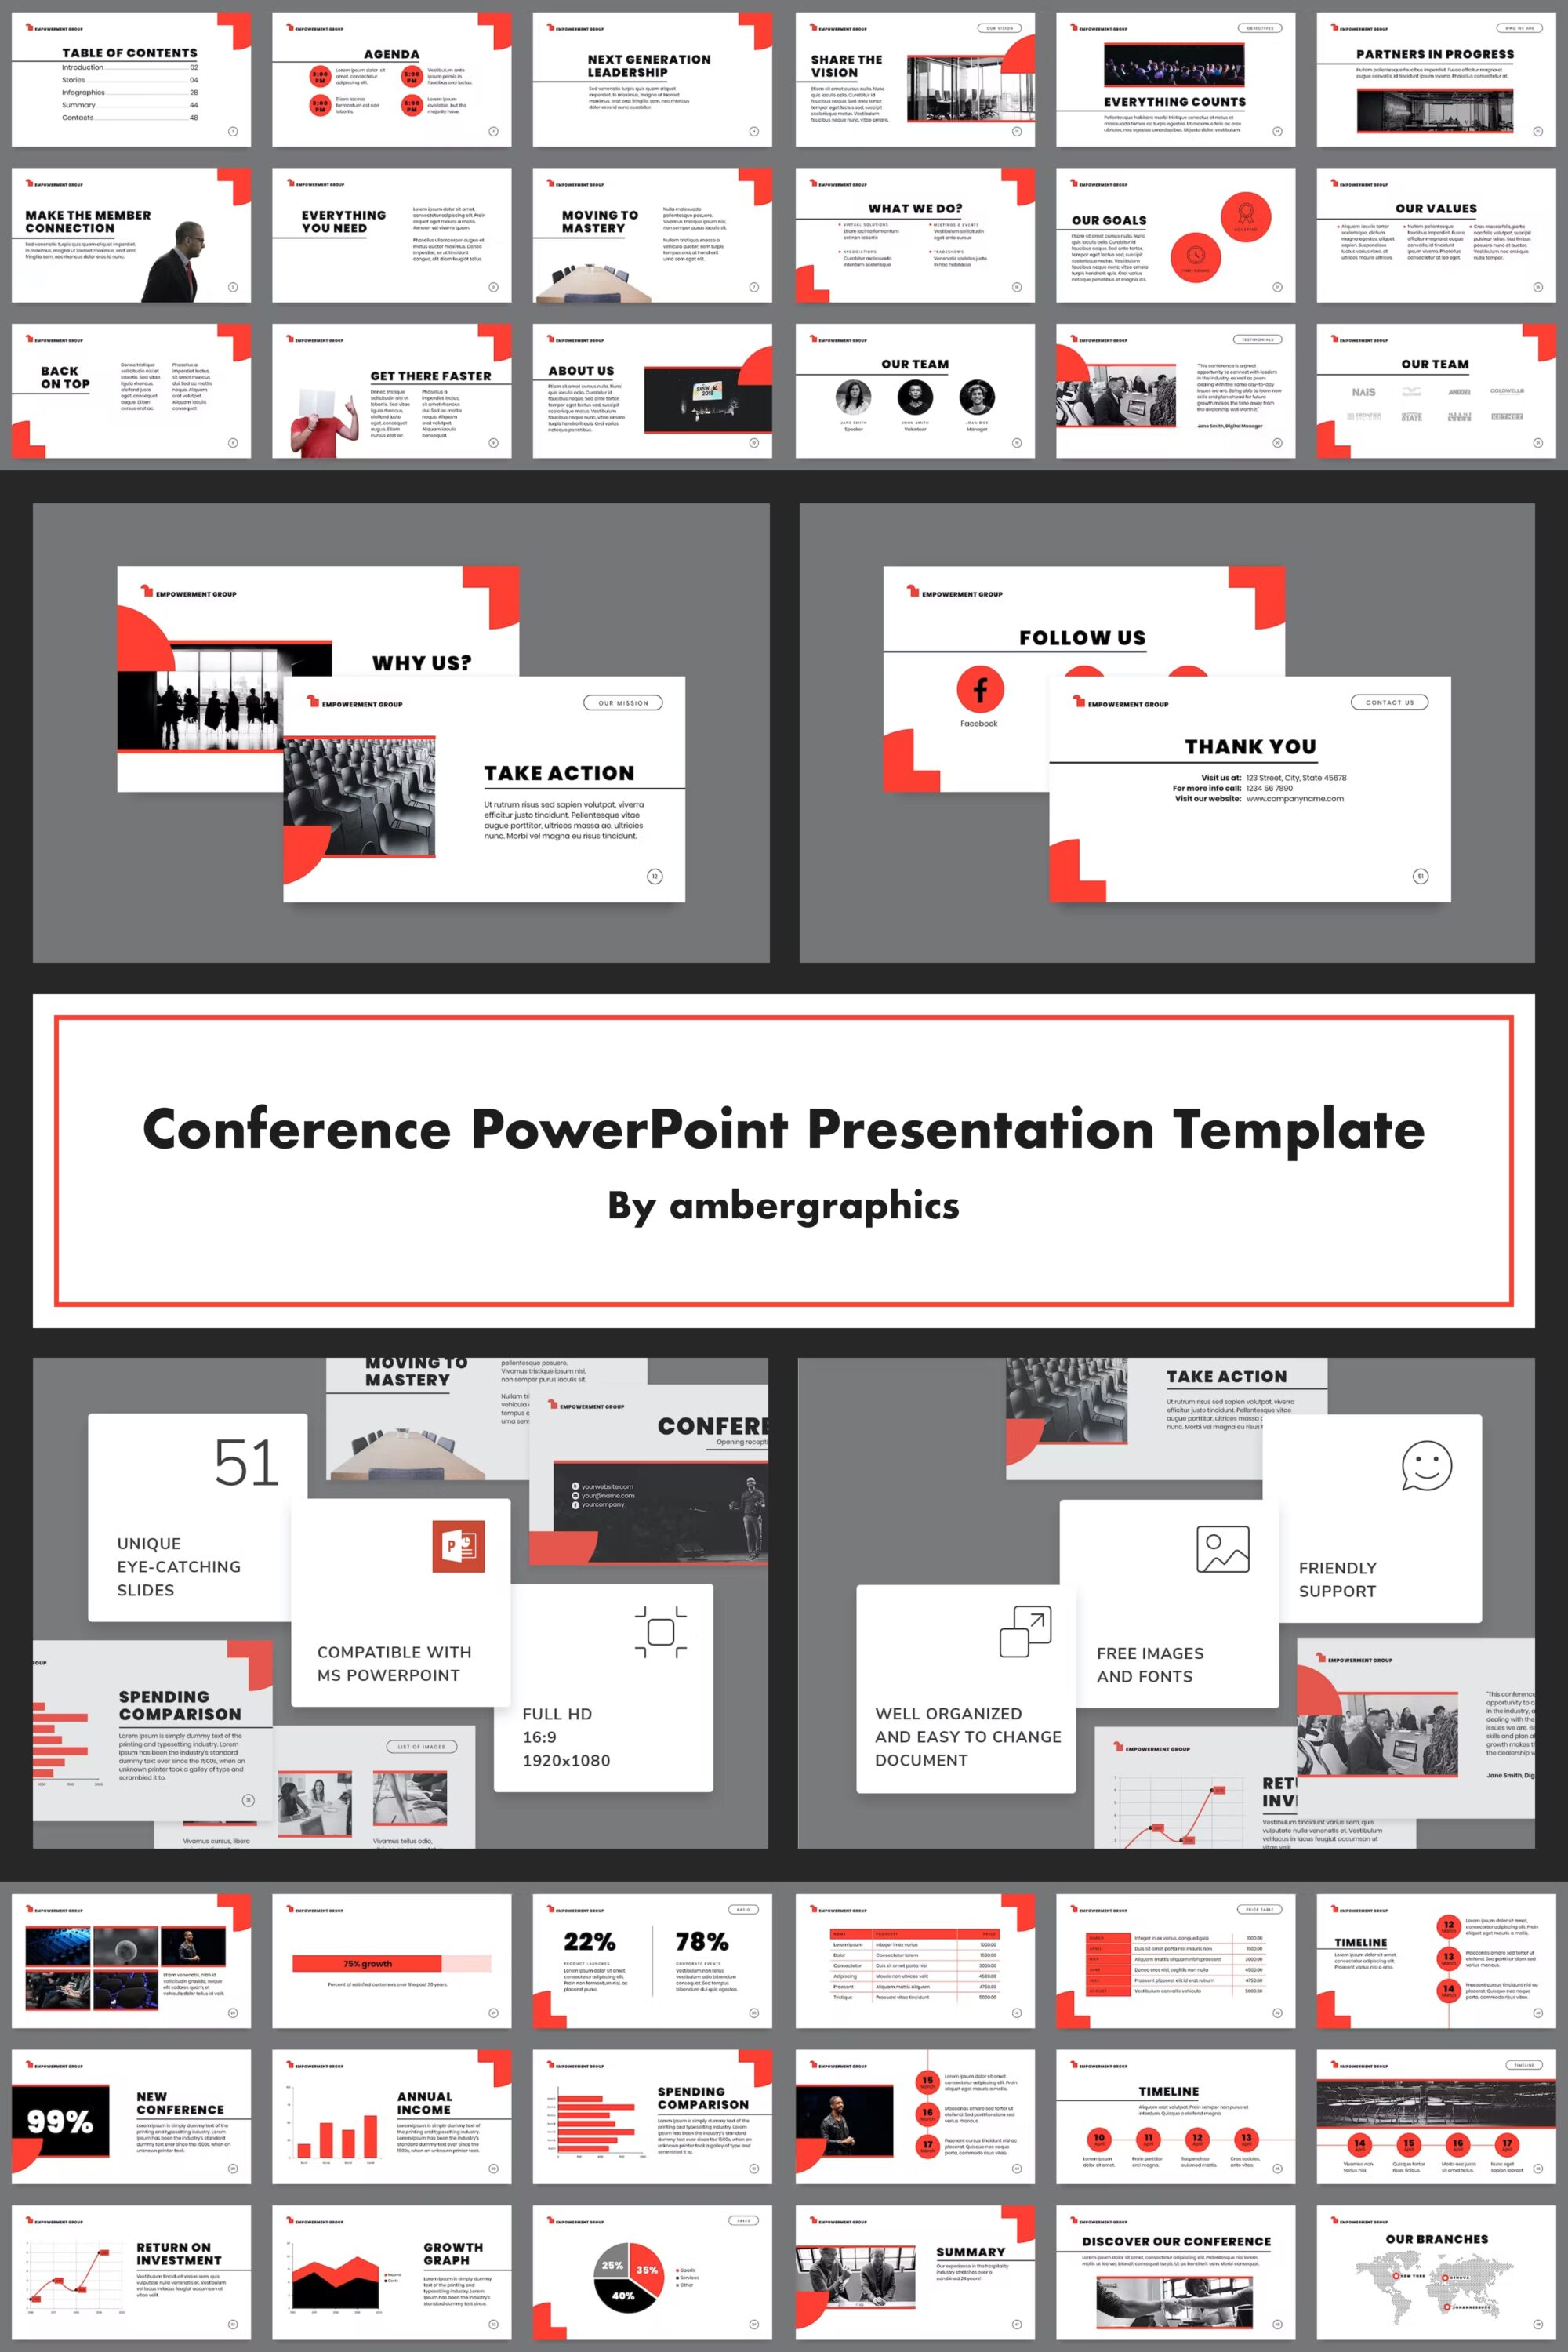 Conference powerpoint presentation template illustration of pinterest.